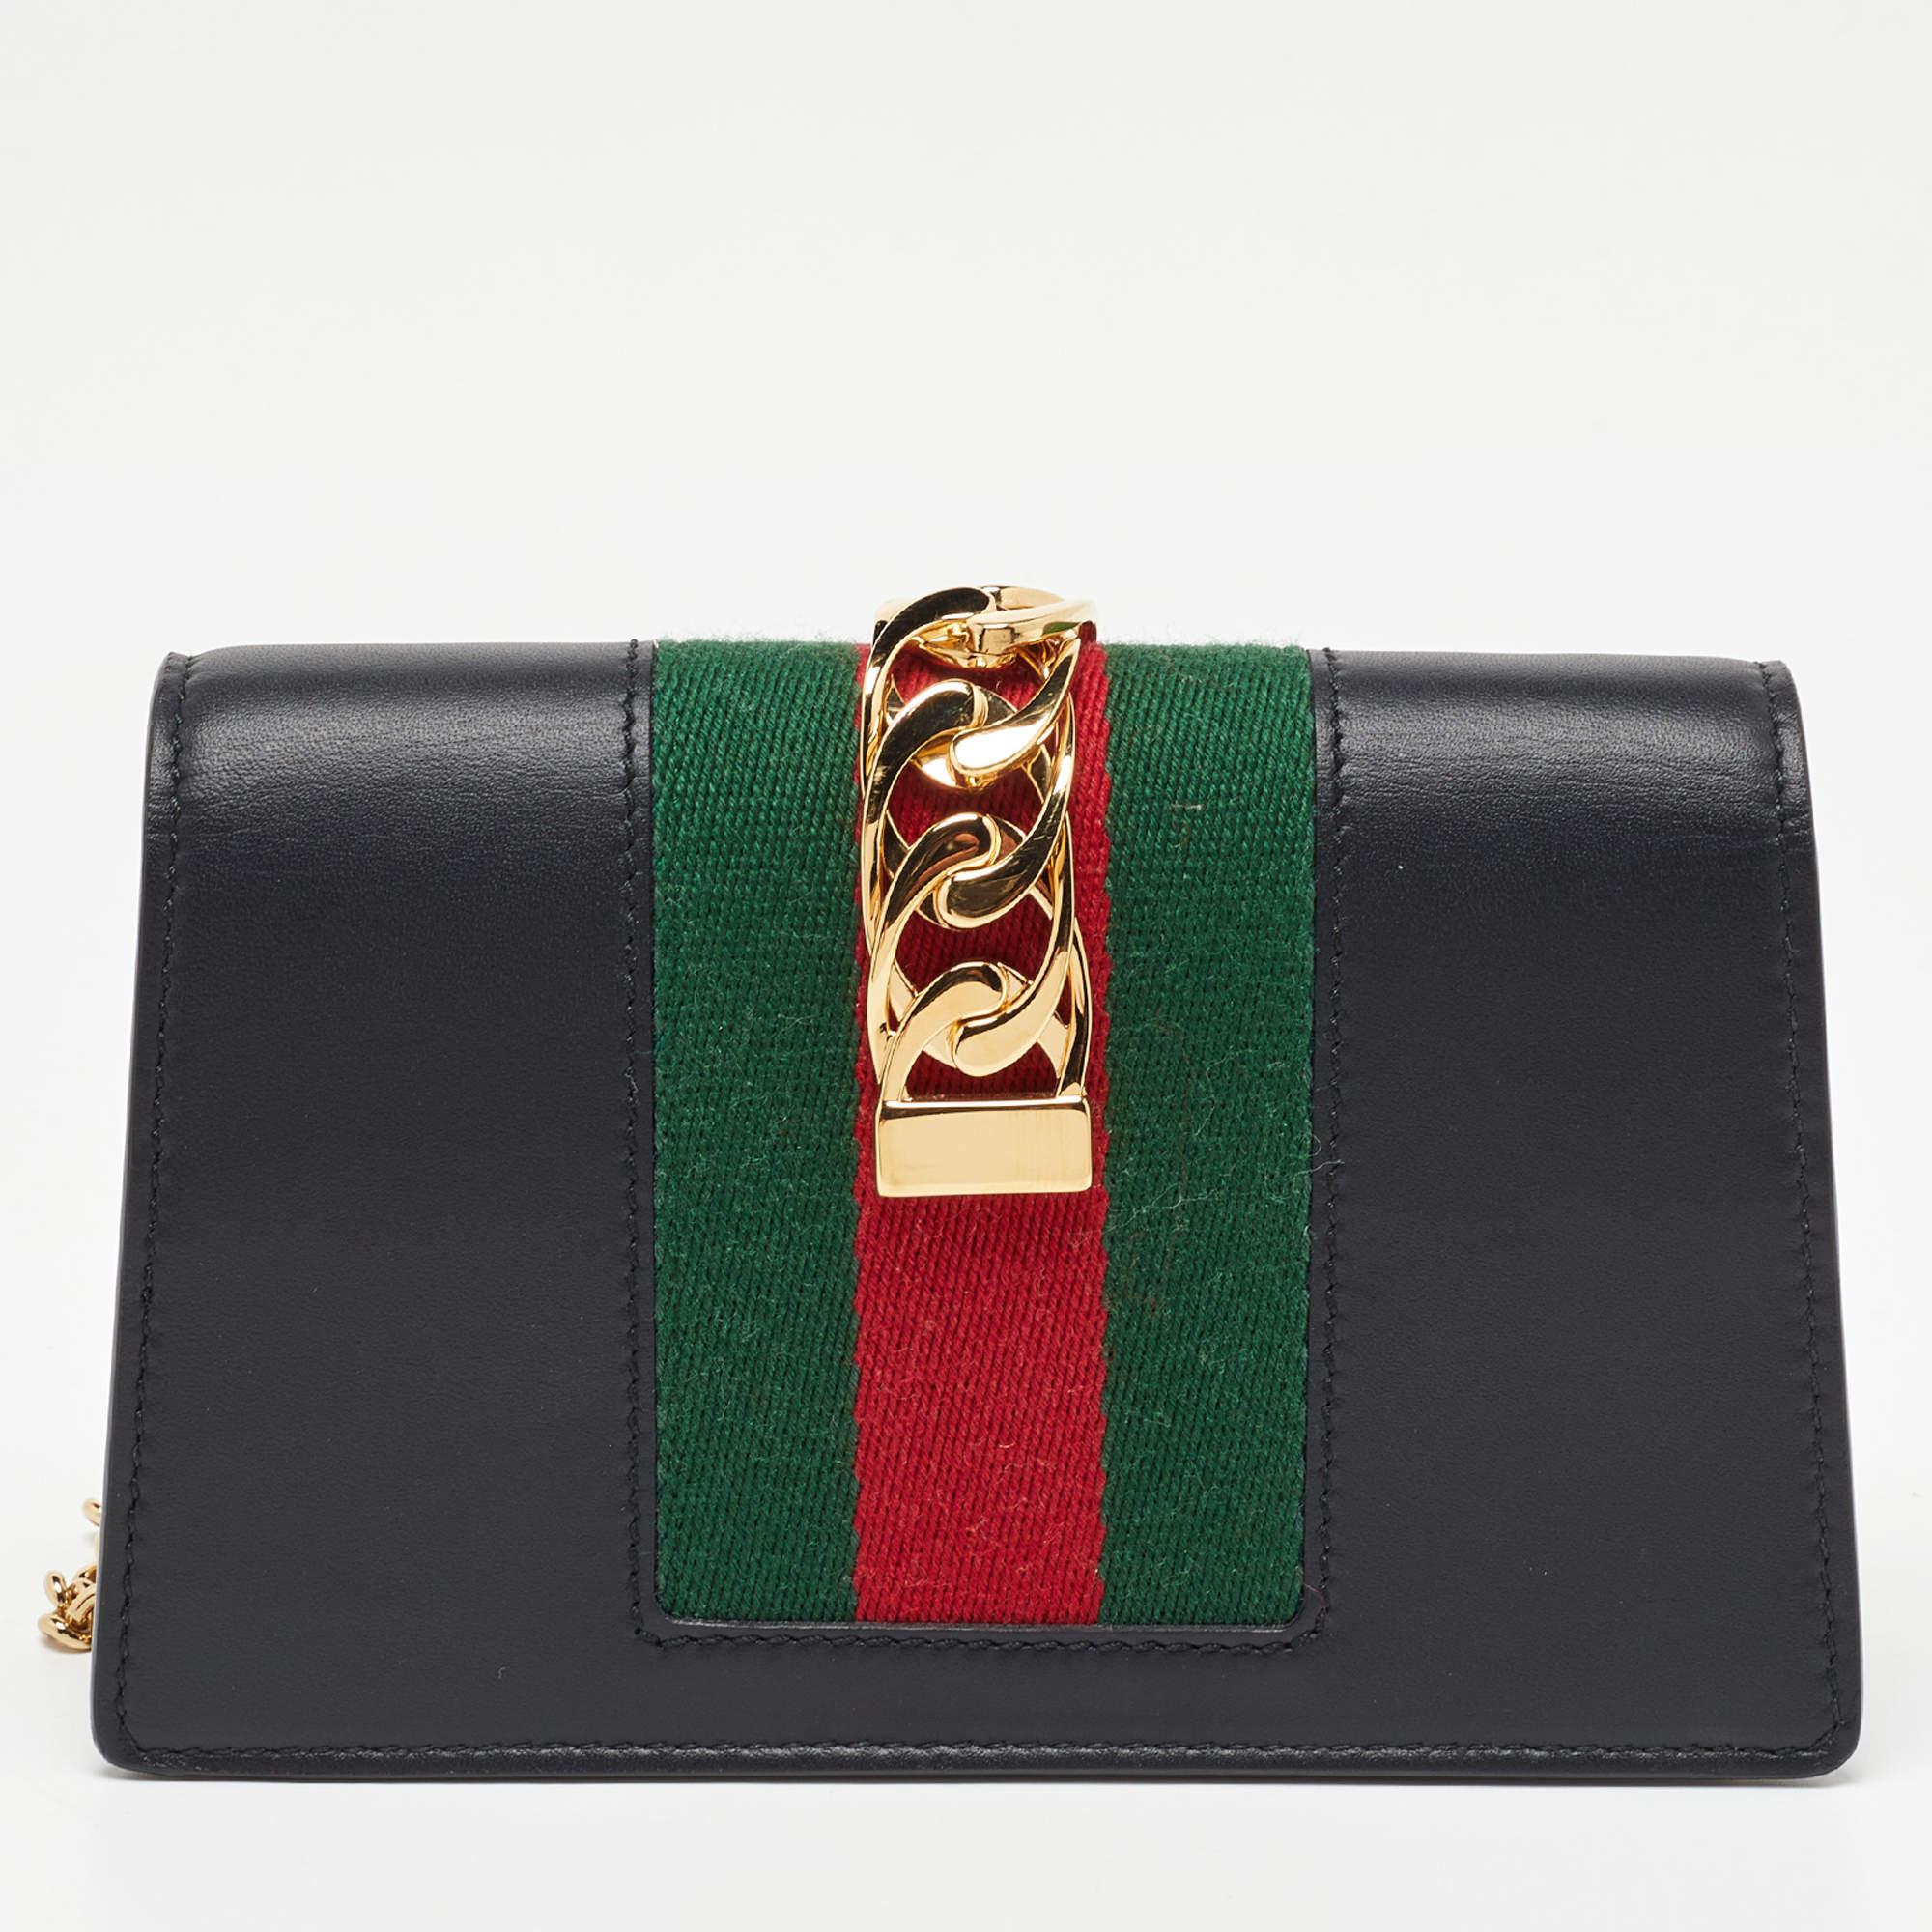 From the house of Gucci comes this gorgeous Sylvie WOC that will perfectly complement all your outfits. It has been luxuriously crafted from black leather and styled with a chain-web decorated flap and a buckle lock to secure the suede interior. The